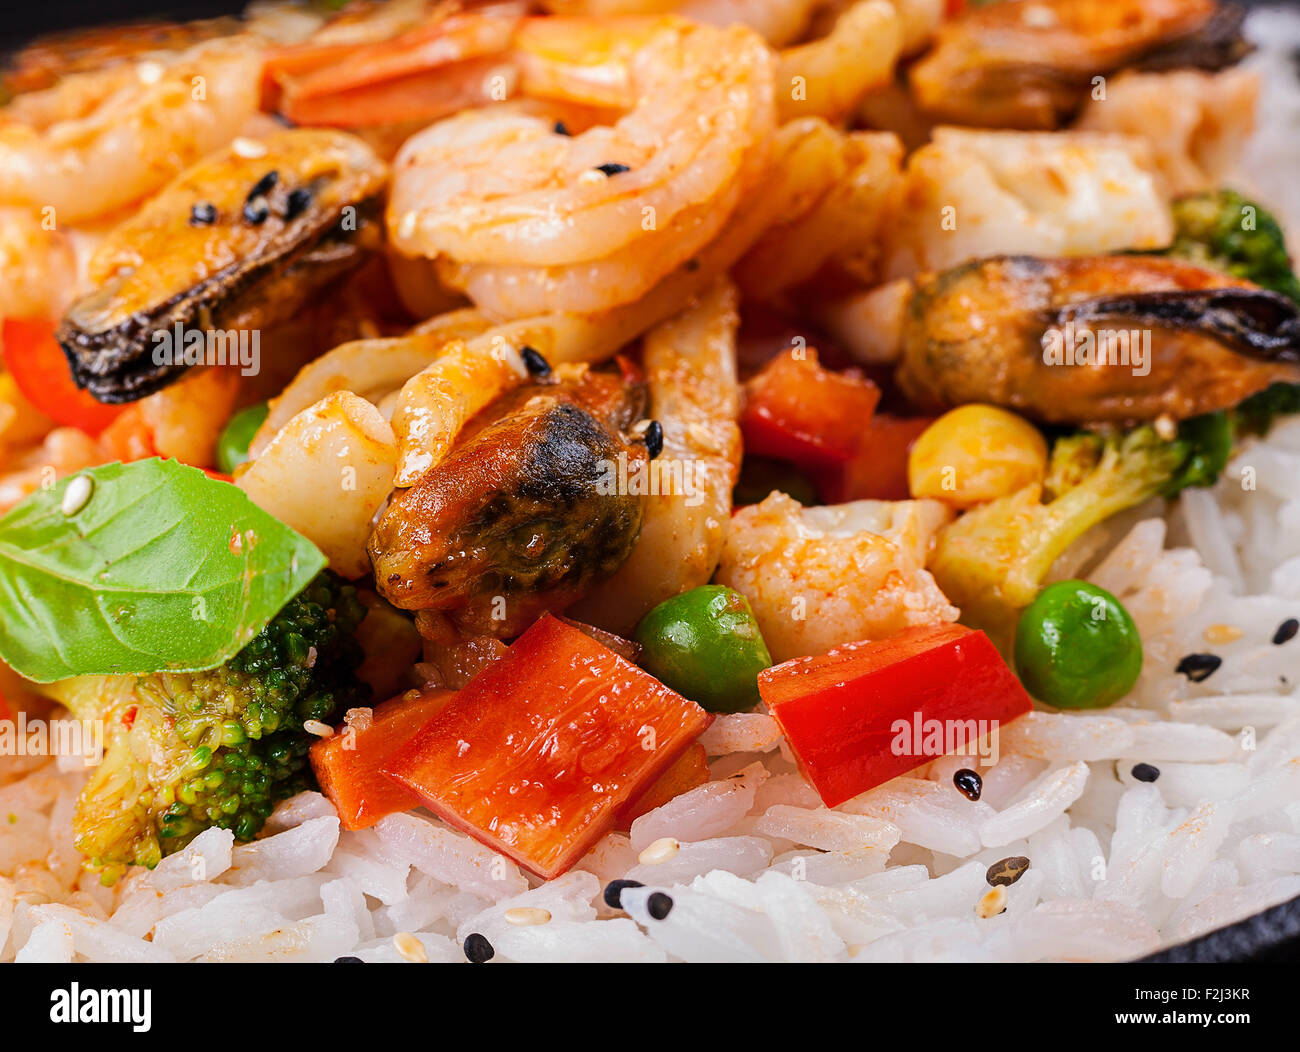 White rice with tiger shrimp and seafood mussel Stock Photo